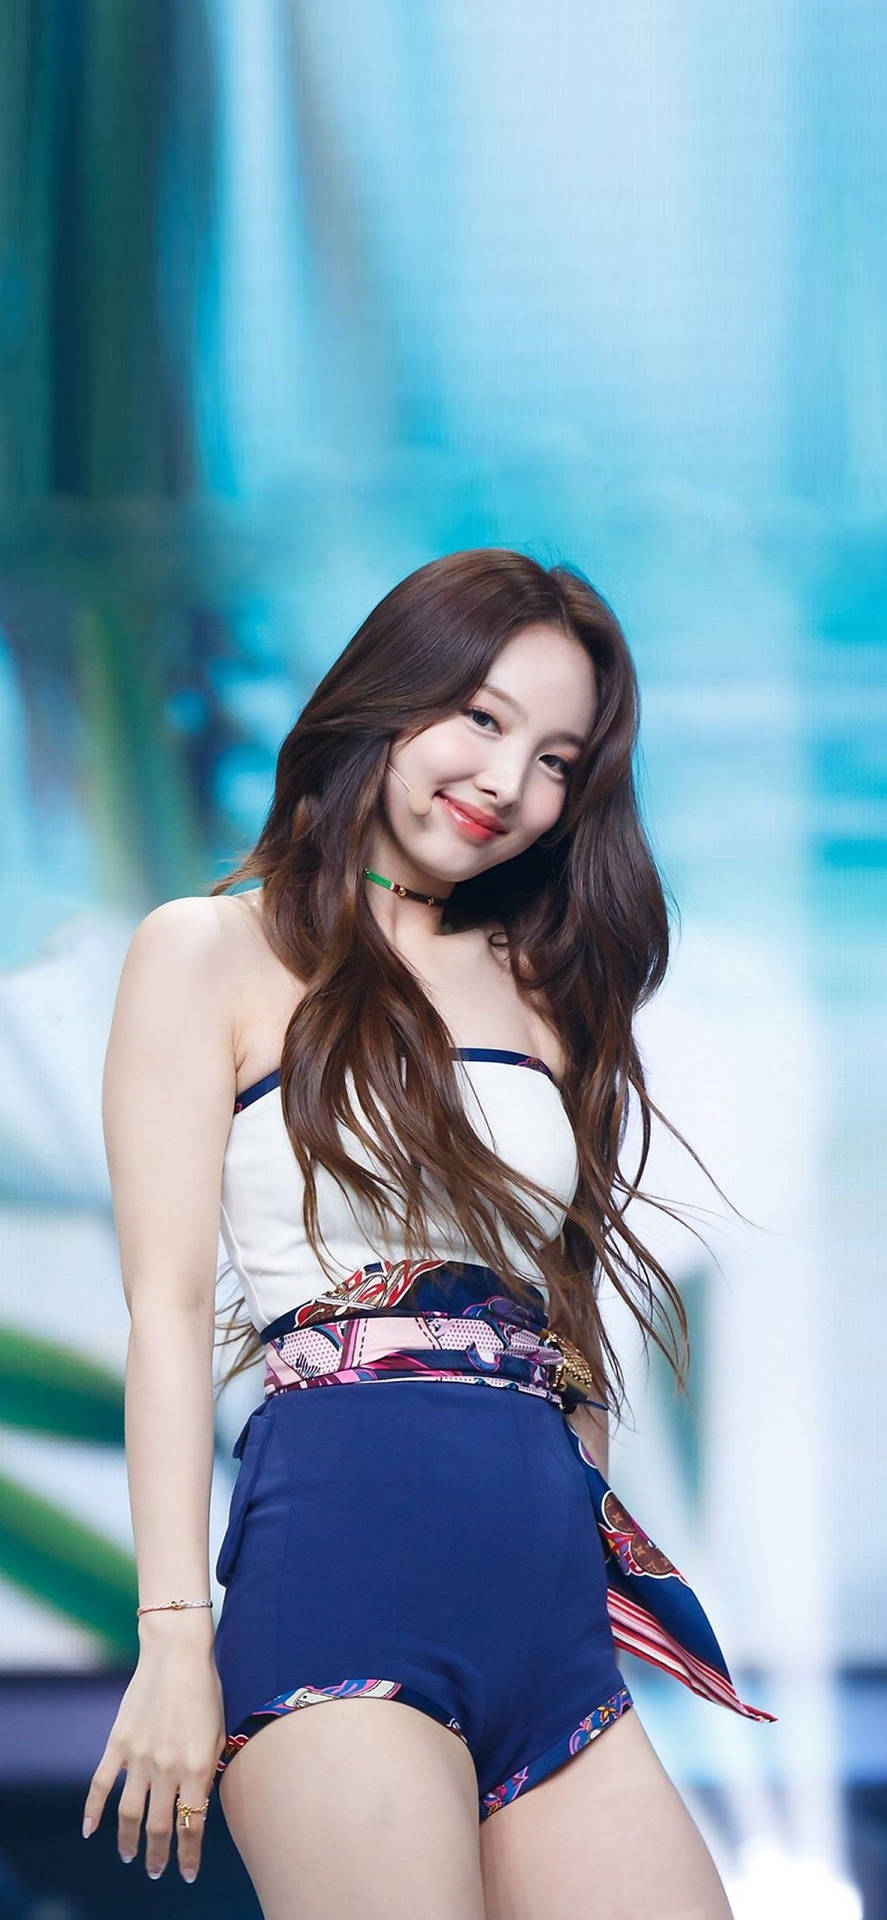 Twice Nayeon In Blue Shorts Wallpaper